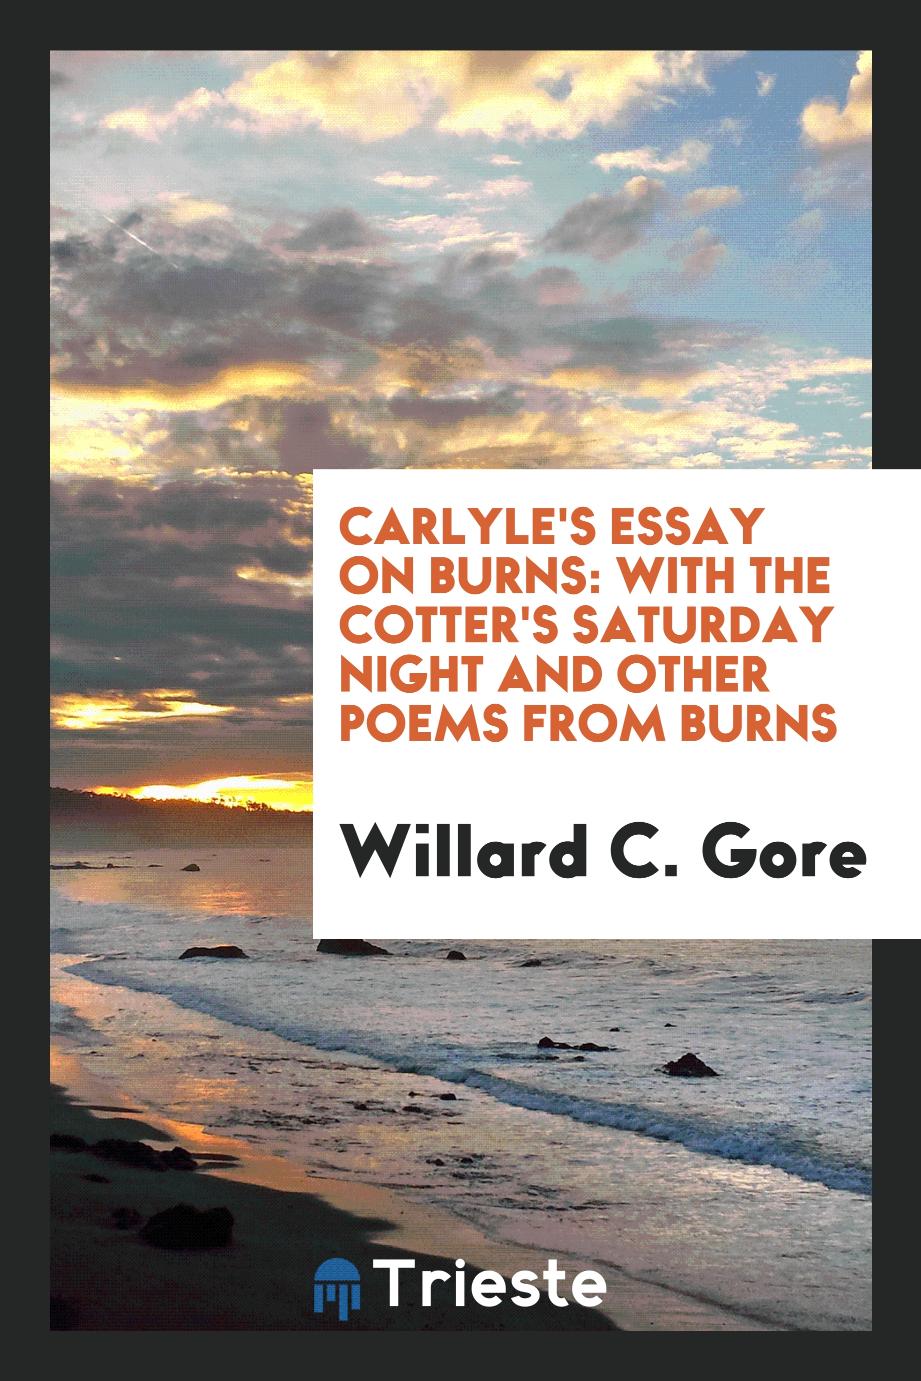 Willard C.   Gore - Carlyle's Essay on Burns: With the Cotter's Saturday Night and Other Poems from Burns